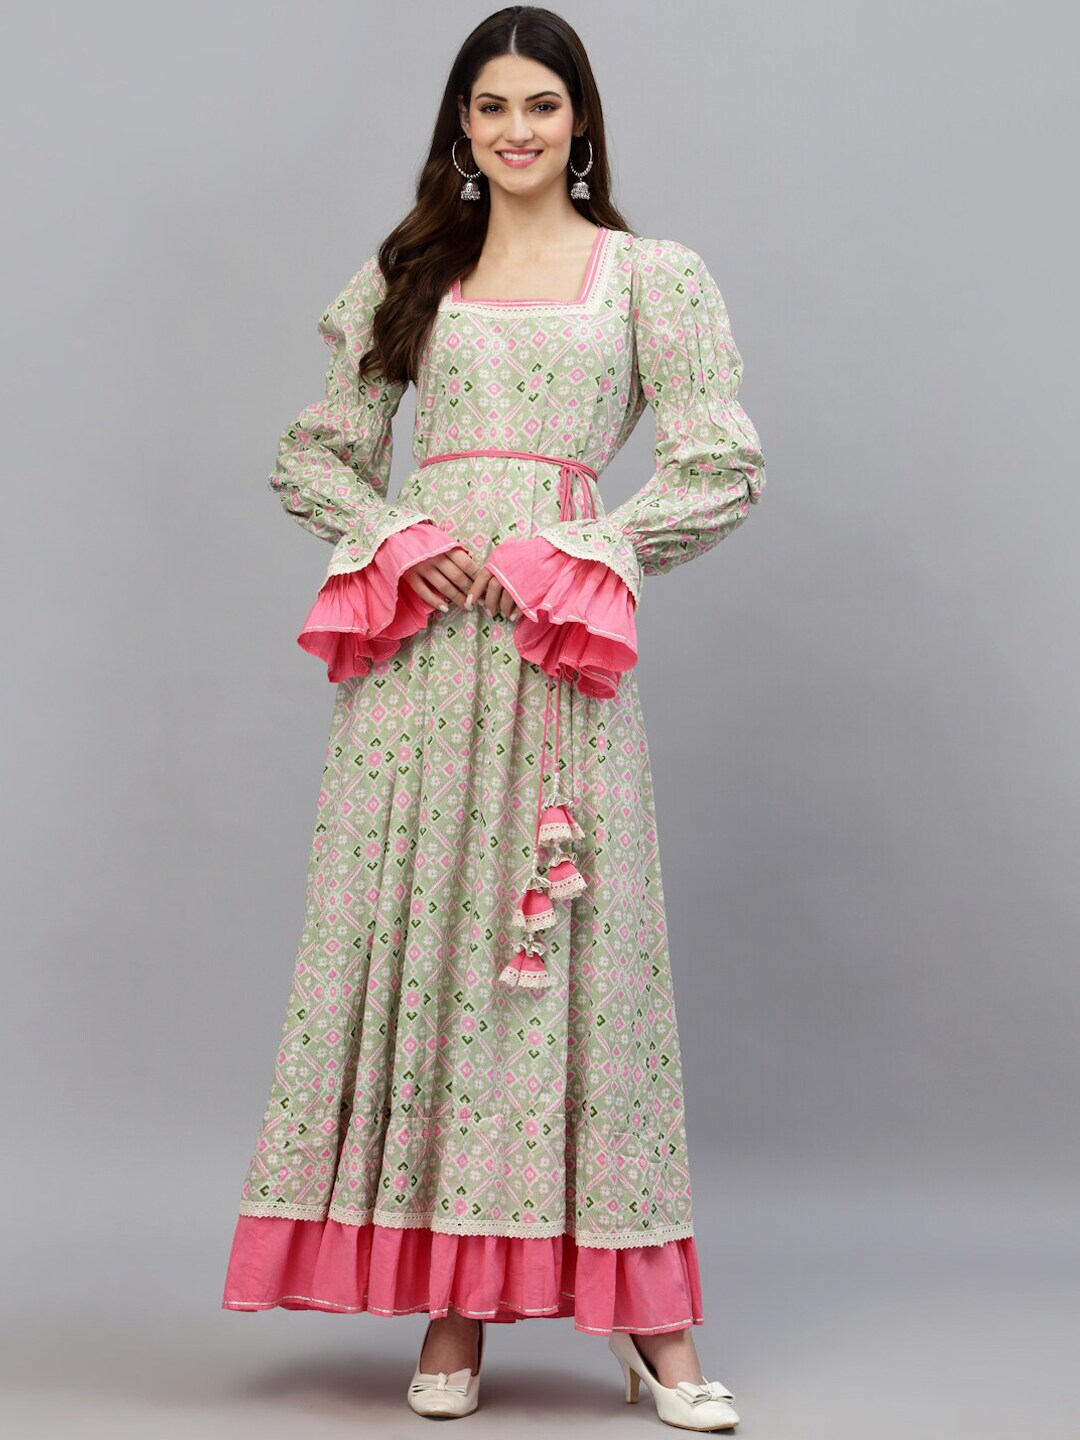 Ragavi Green & Pink Floral Belted Pure Cotton Maxi Dress Price in India